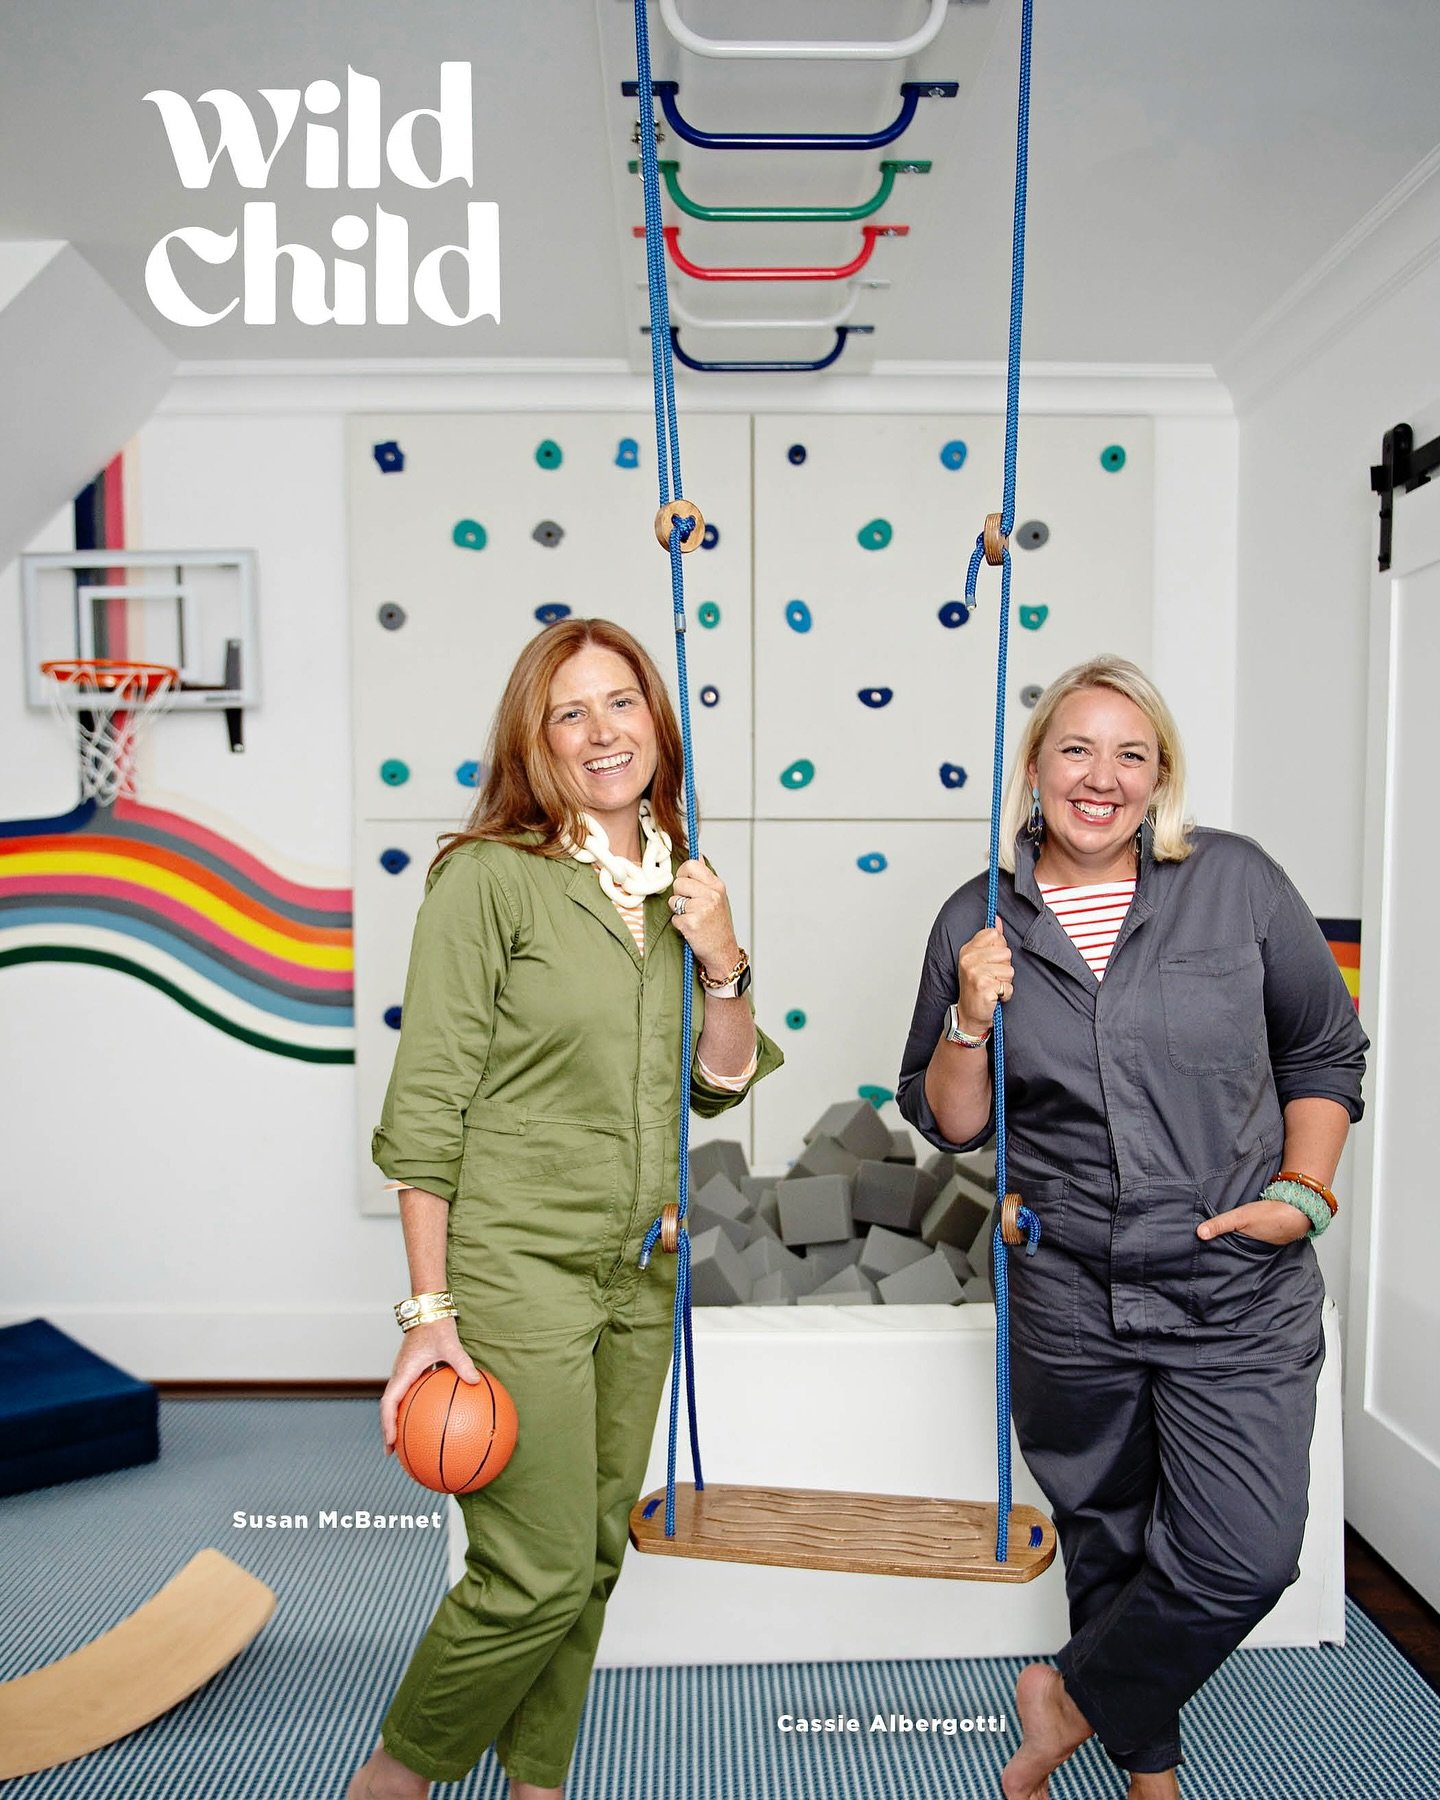 Had to give this shot a permanent grid spot! ❤️

Thank you @thebeautifulmessphotography for capturing us in our jumpsuits (!) and to @tsgcharlotte for including us in Vol. 13! It is an honor! 

#wildchild #playwildchild #thepowerofplay #powerofplay #